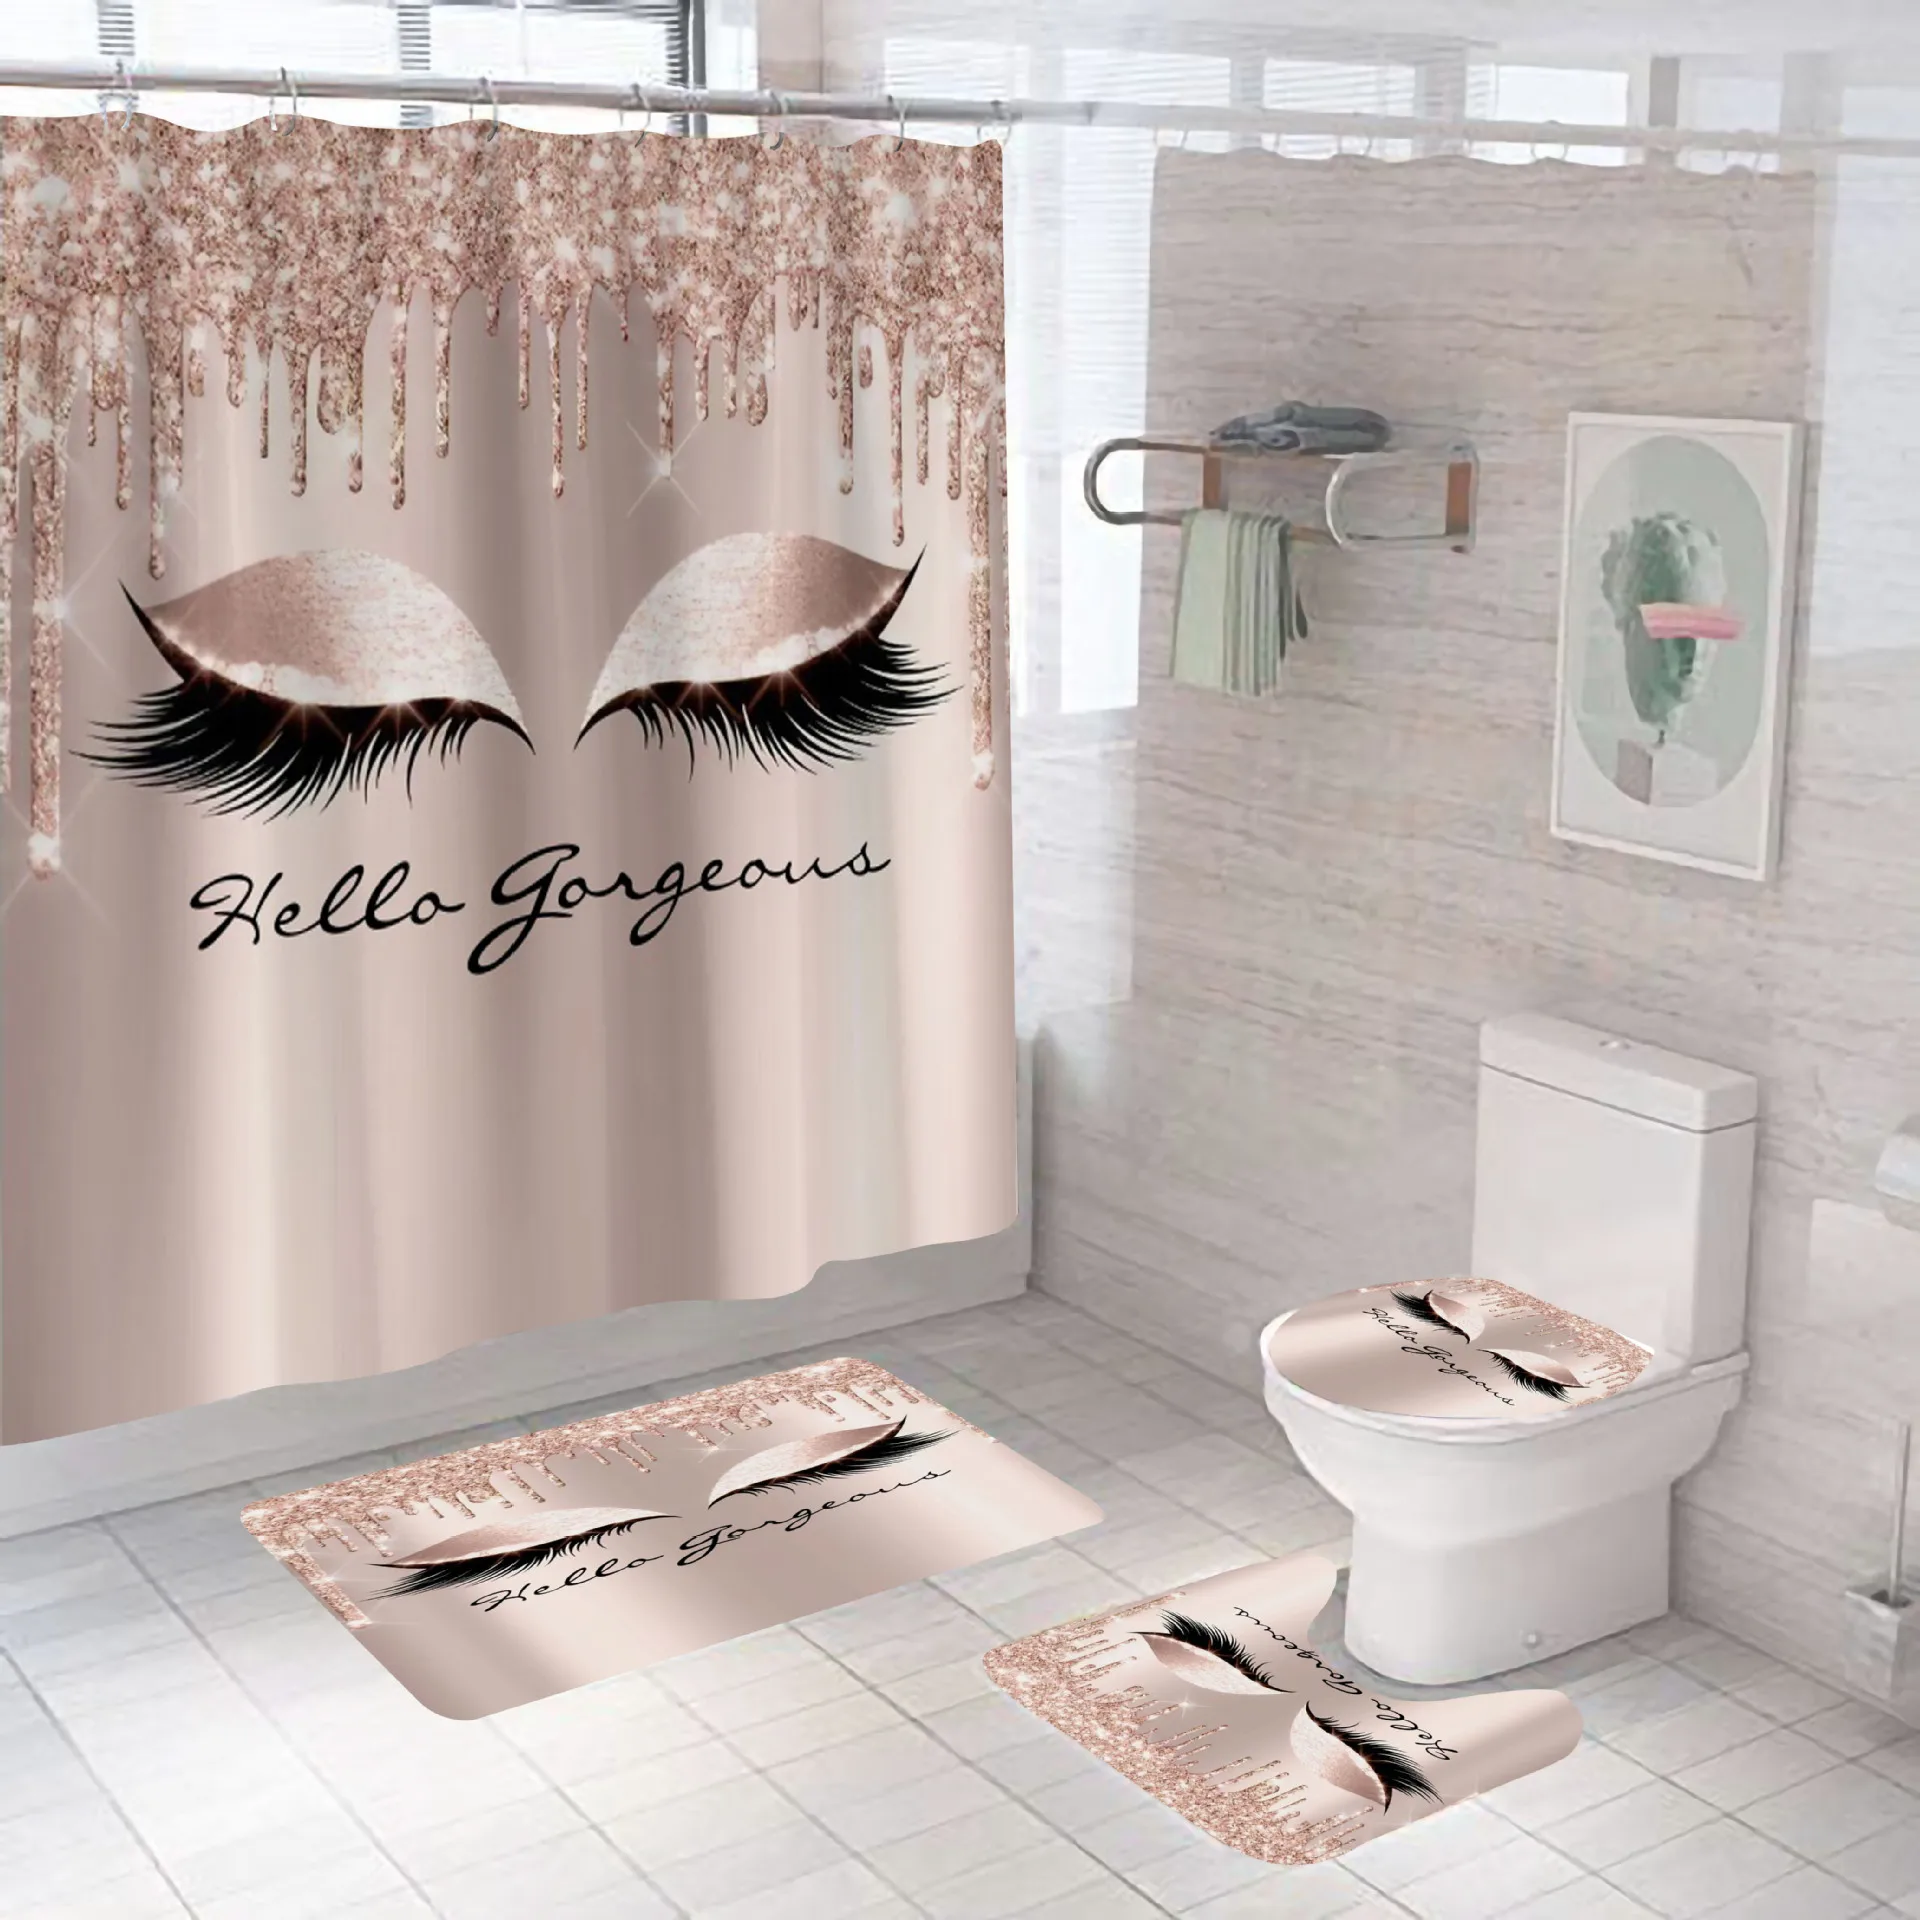 

Wholesale hot sell in stock designs 3d custom printing shower curtain set bathroom set with rug and mats